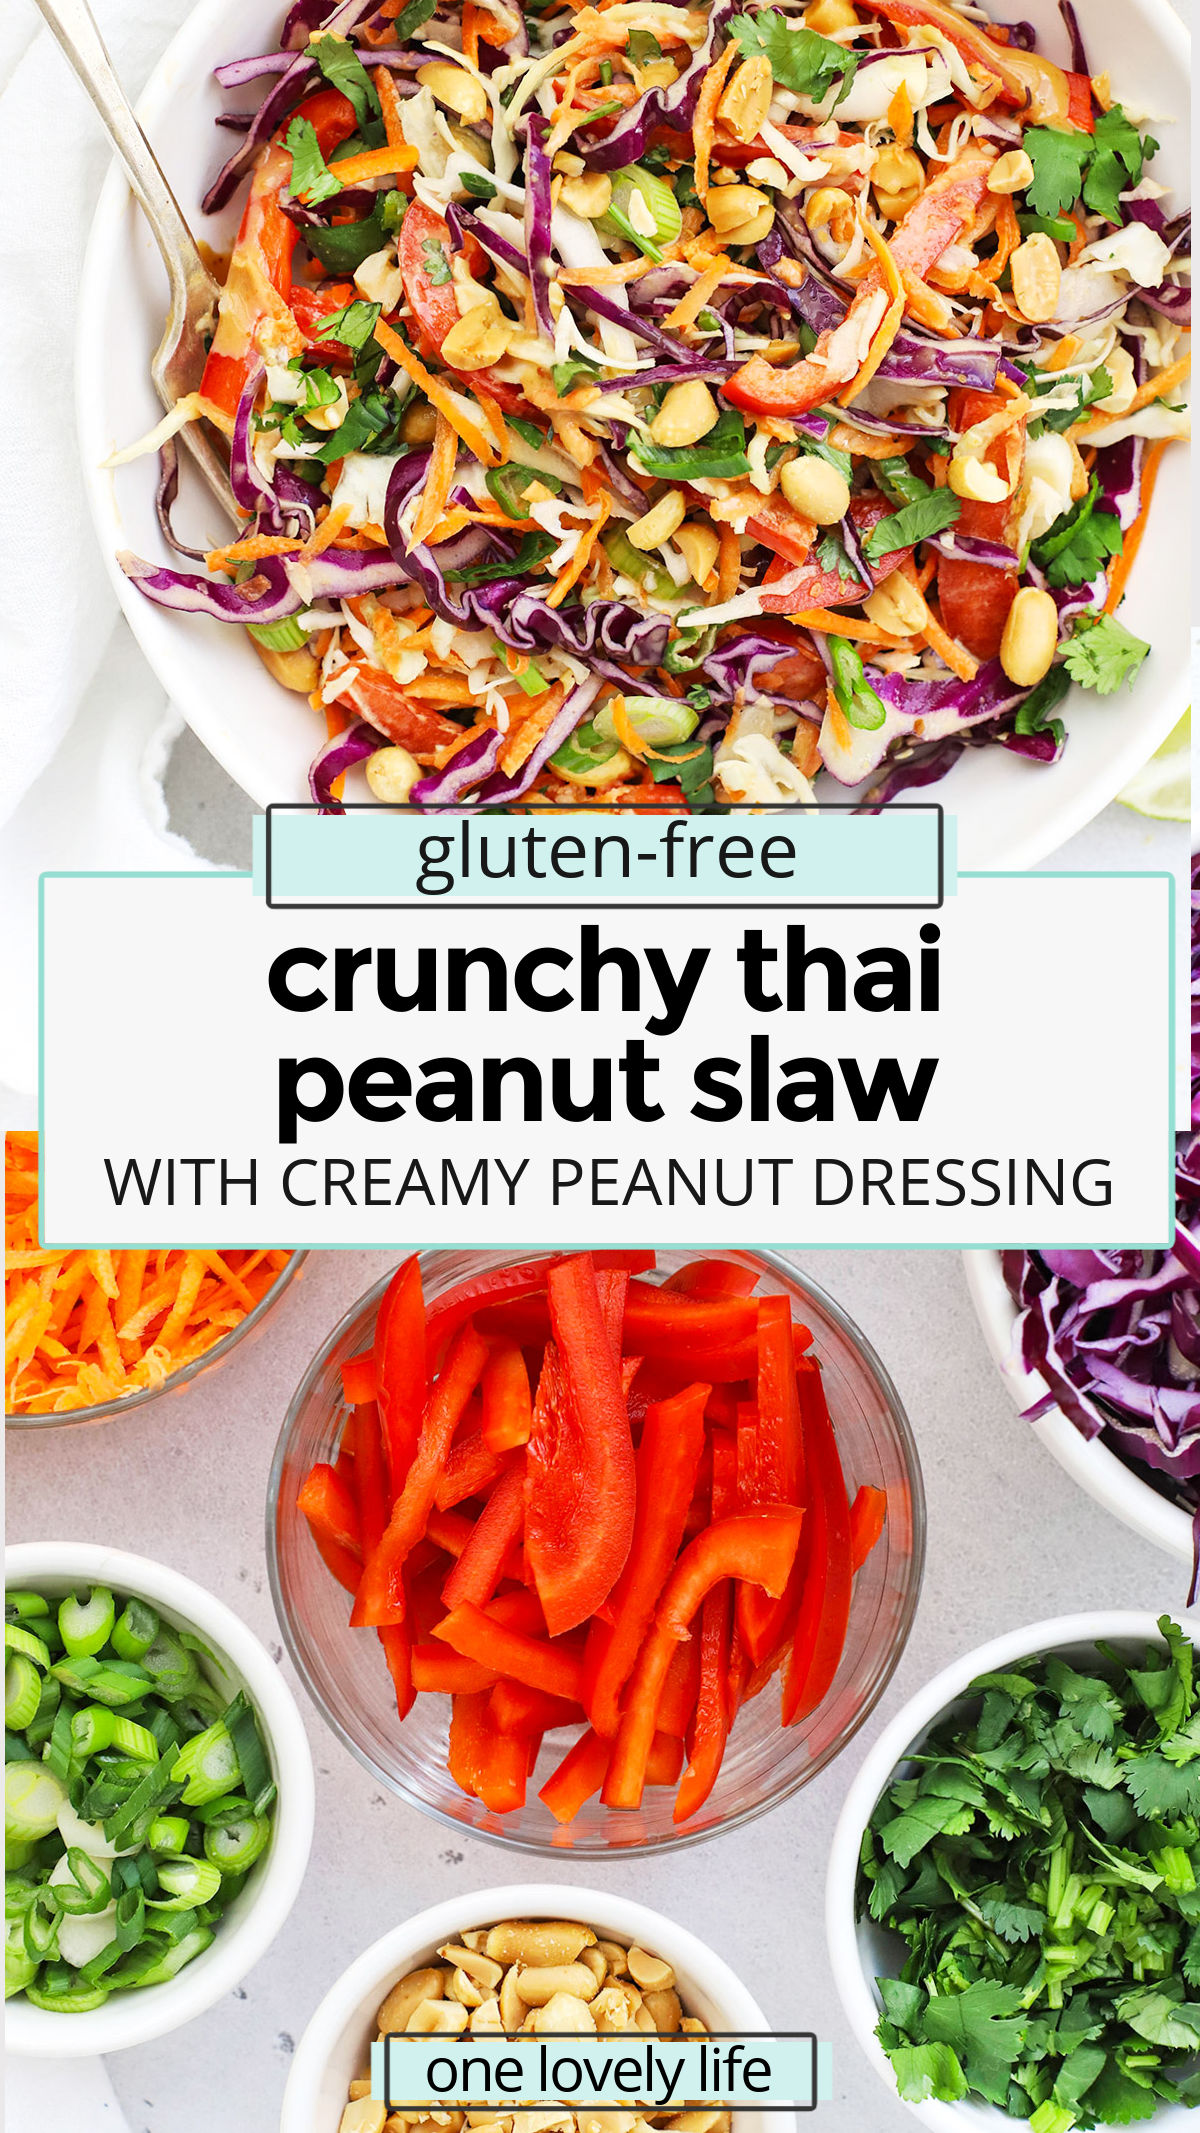 Crunchy Thai Peanut Slaw - This veggie slaw with peanut sauce is the perfect blend of colors, flavors, and textures. Fresh, crunchy, creamy, and gorgeous, it's a perfect healthy side dish. (Vegan, Gluten-Free) // thai coleslaw // asian coleslaw // peanut coleslaw // coleslaw without mayo // coleslaw no mayo // peanut sauce dressing // peanut dressing // vegan coleslaw // coleslaw with peanut sauce // healthy coleslaw